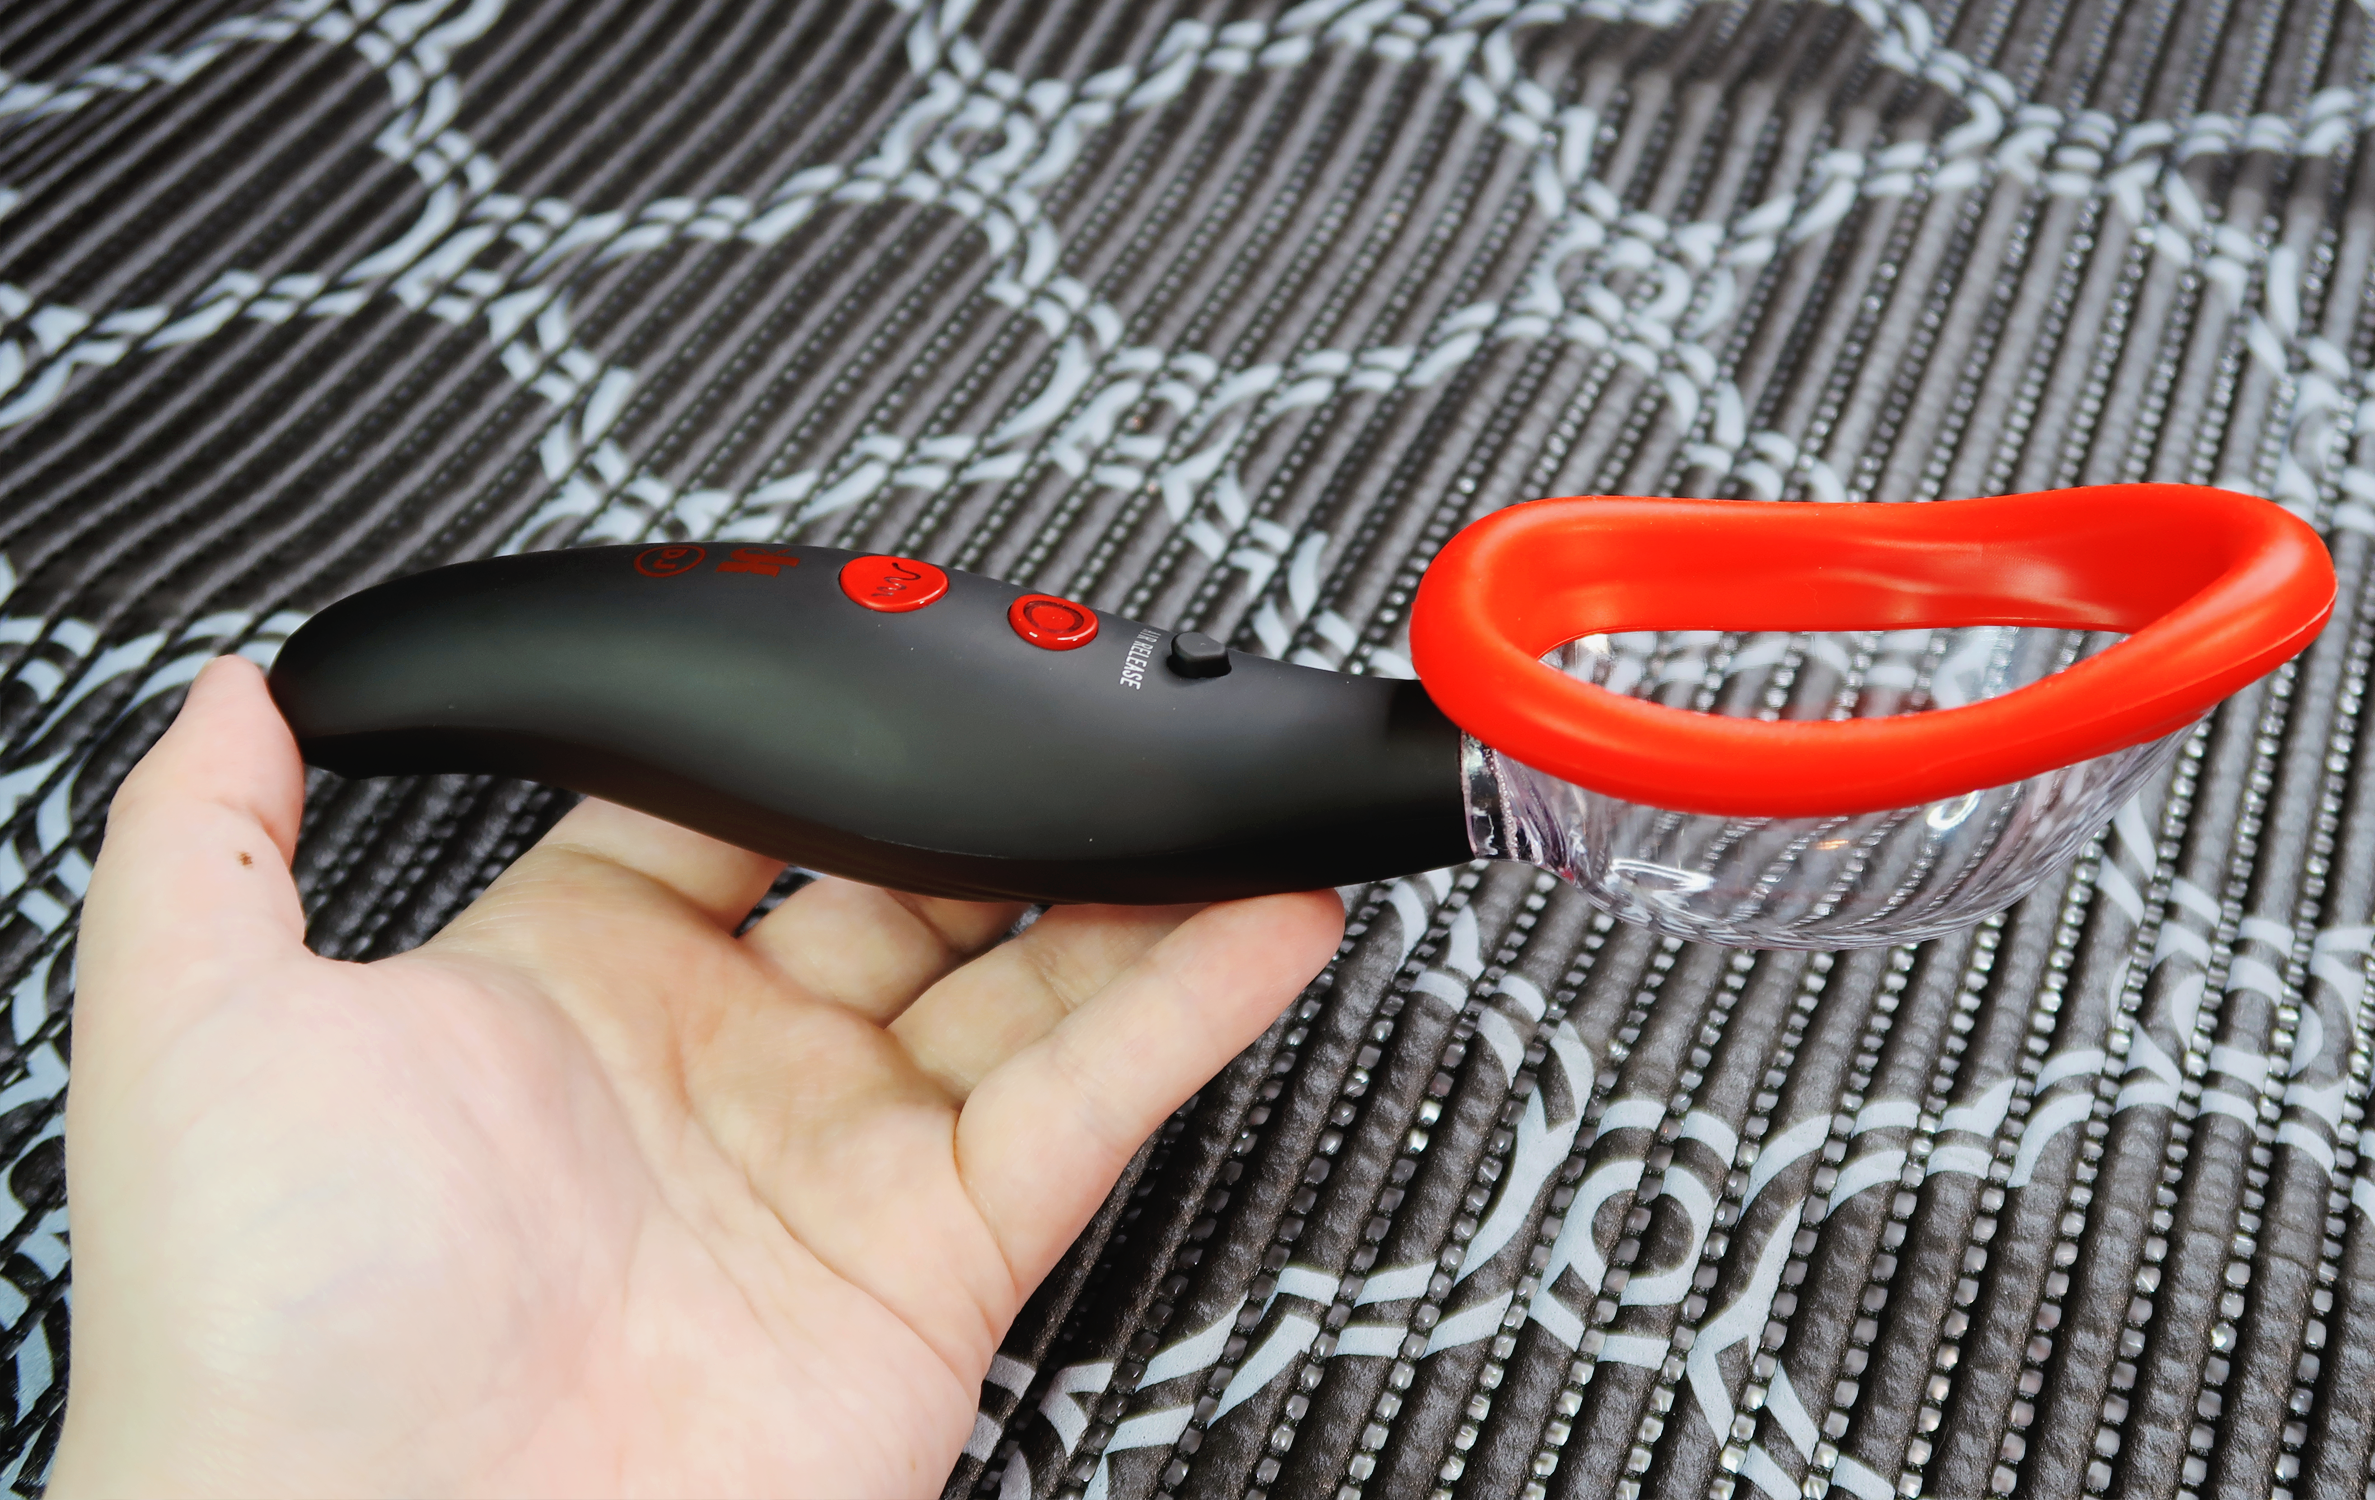 A white person's hand holding a spoon-shaped pussy pump. The pump is black with red buttons and trim.